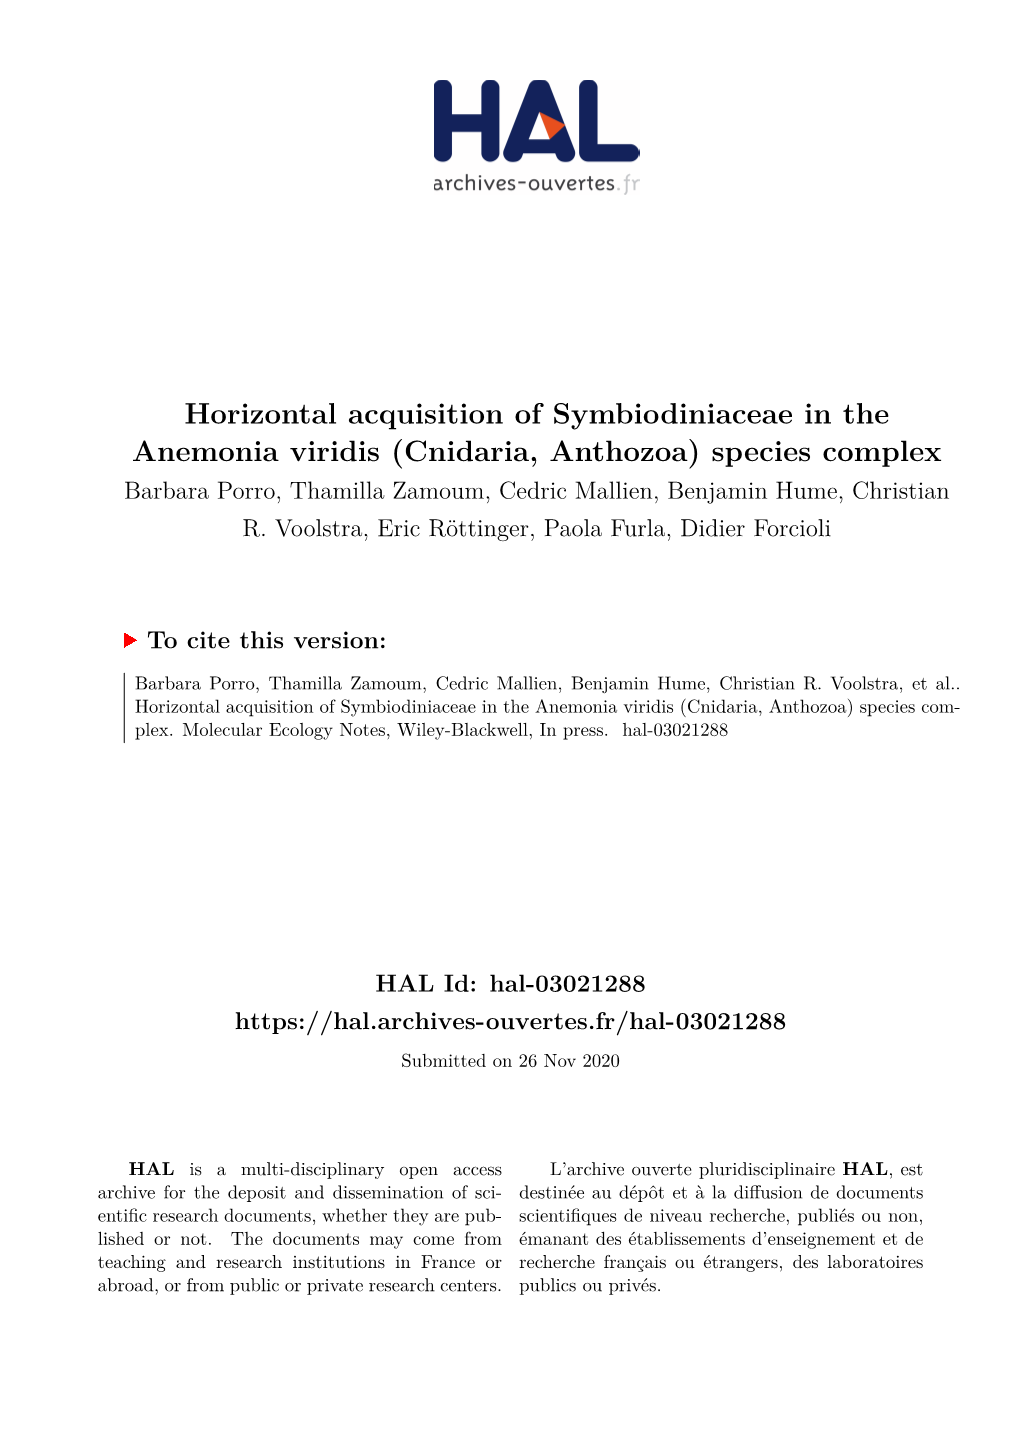 Horizontal Acquisition of Symbiodiniaceae in the Anemonia